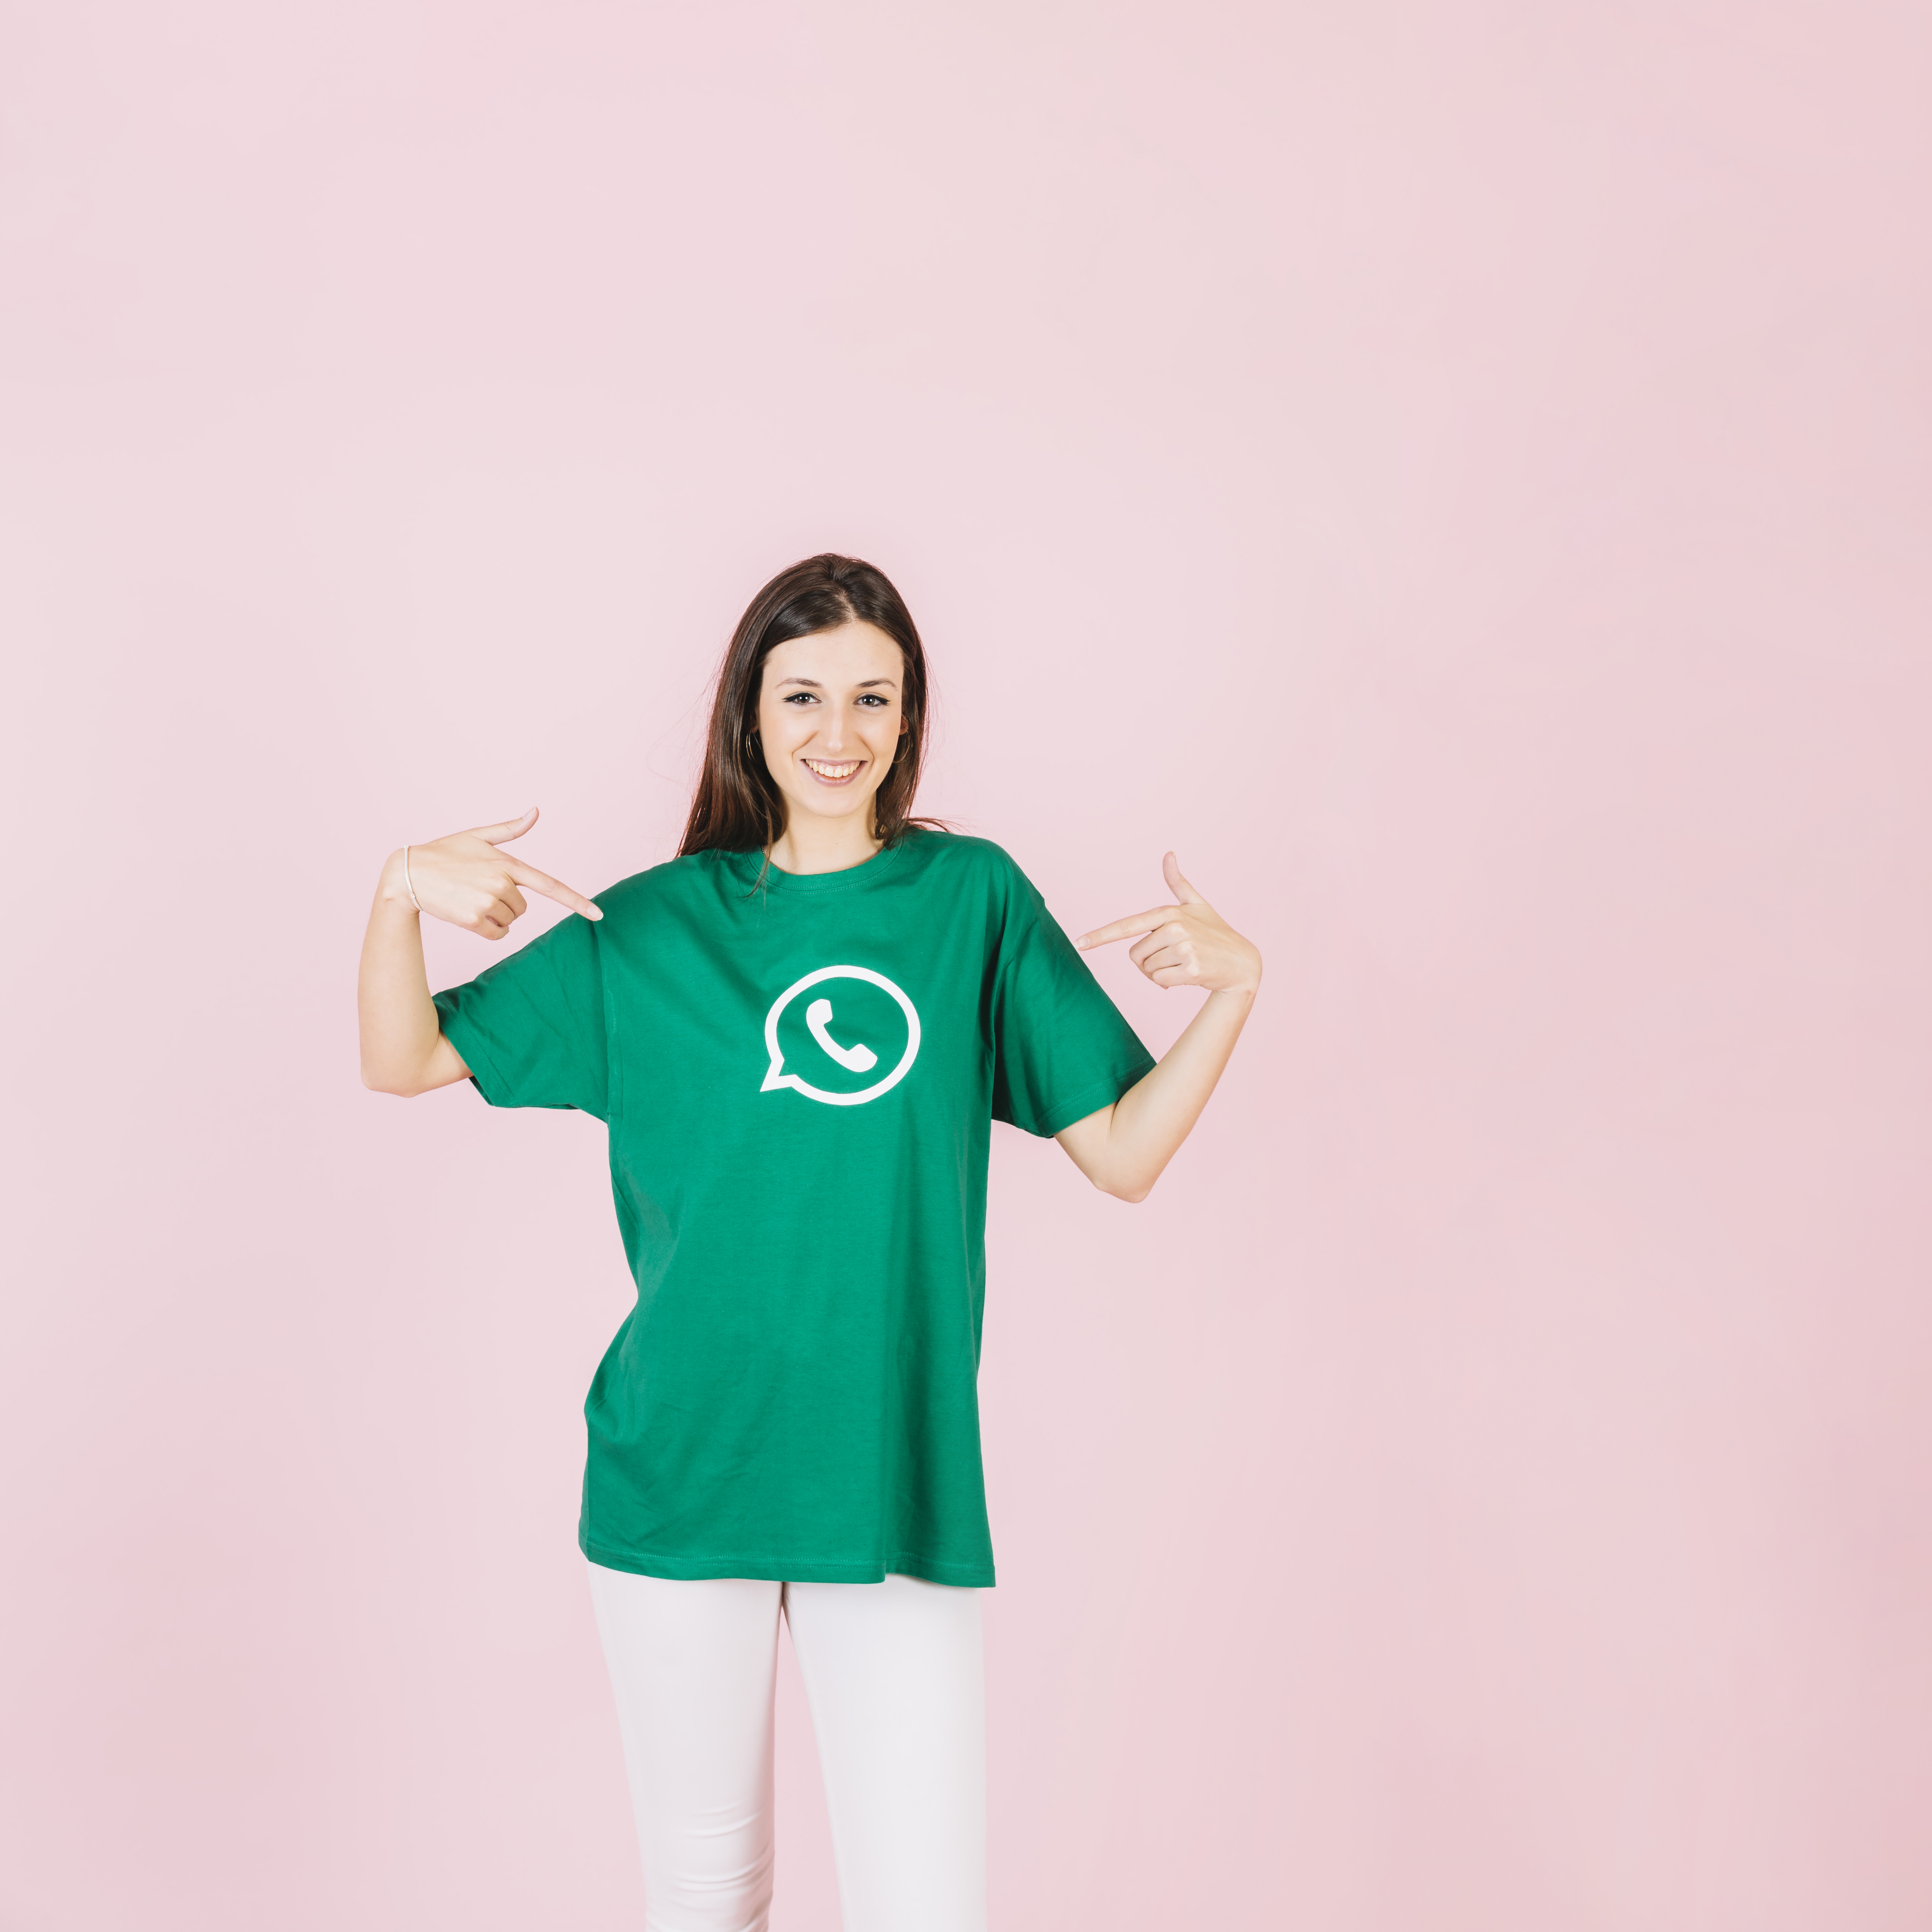 portrait-smiling-woman-pointing-her-t-shirt-with-whatsapp-icon.jpg